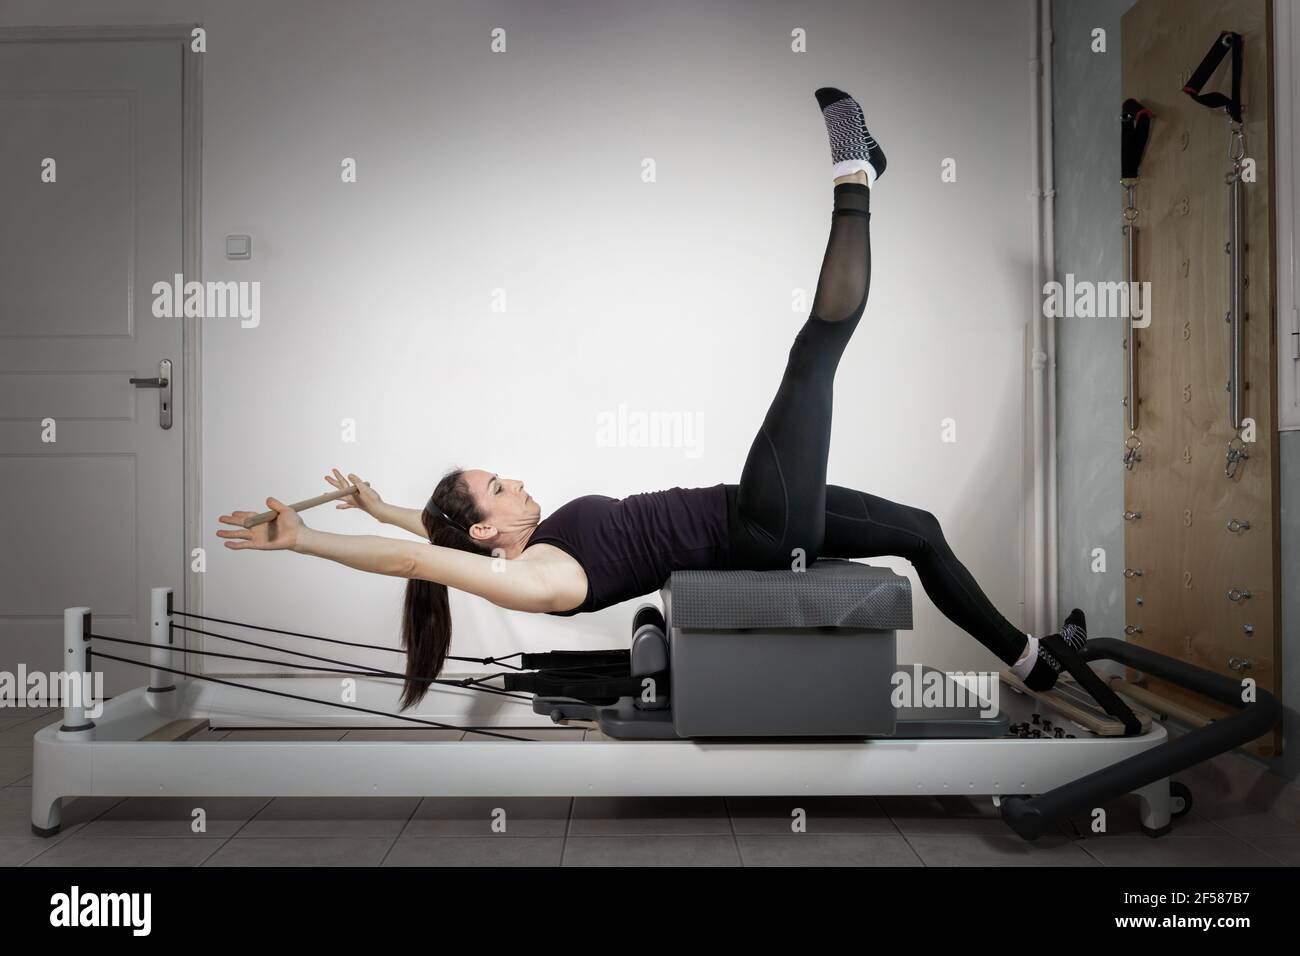 A woman doing pilates exercises on a reformed bed. Stock Photo